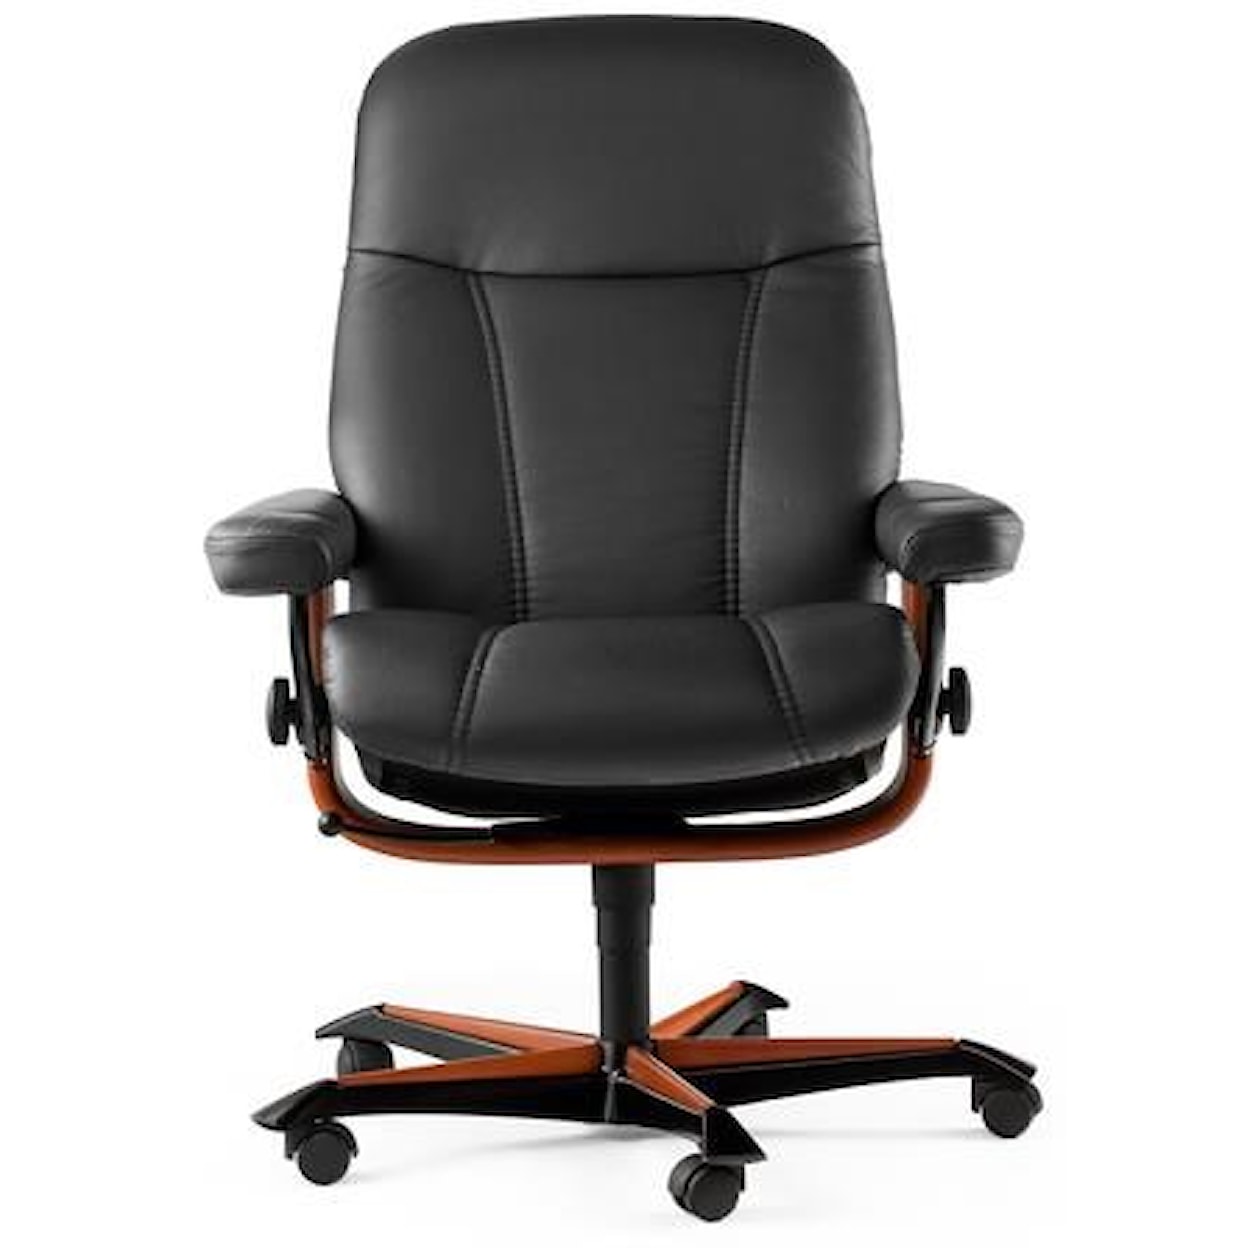 Stressless by Ekornes Consul Office Chair